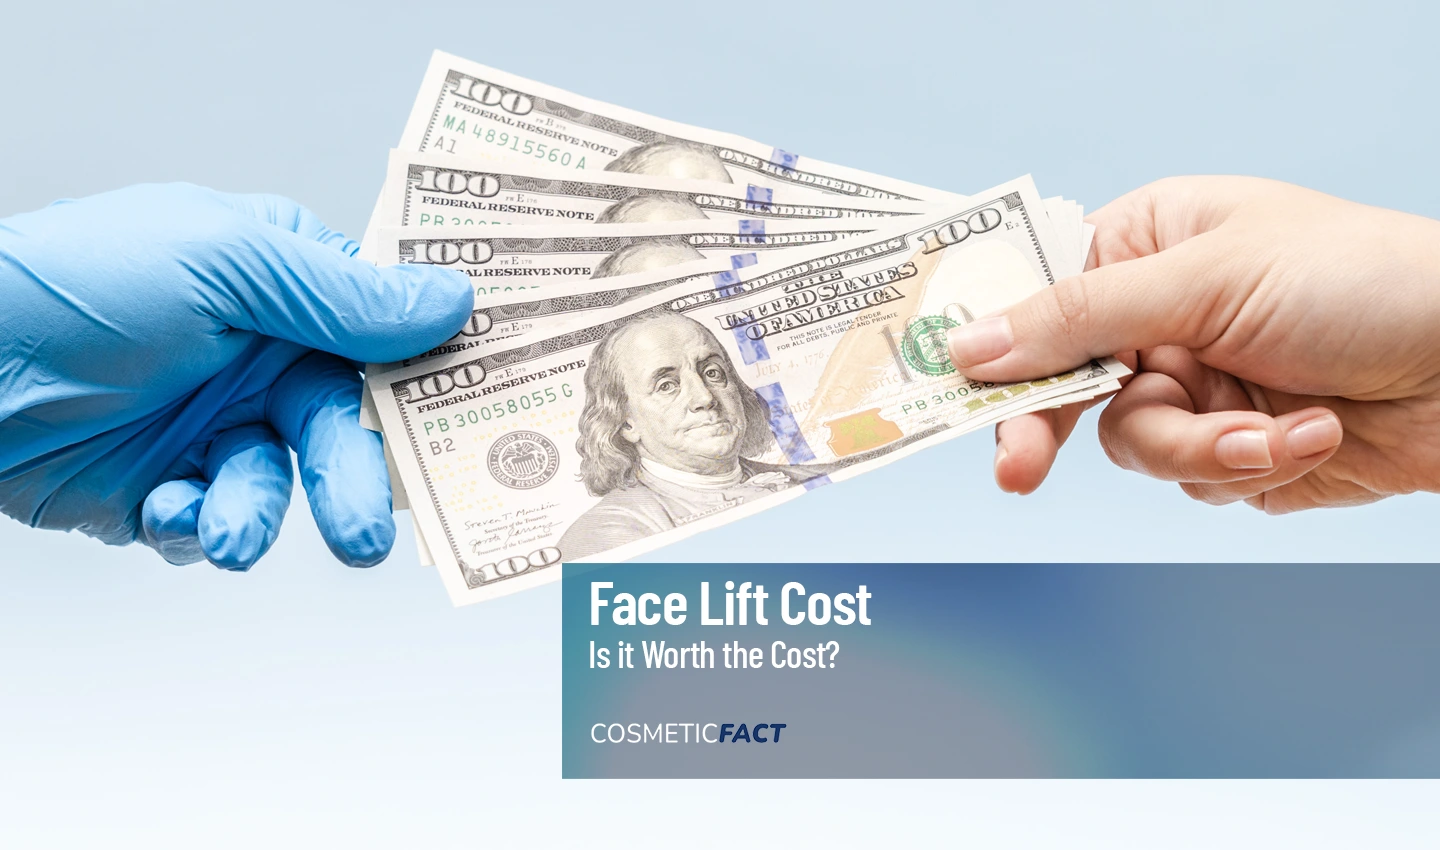 Hand of a person giving money to a surgeon with gloves, representing if the facelift surgery worth the cost.